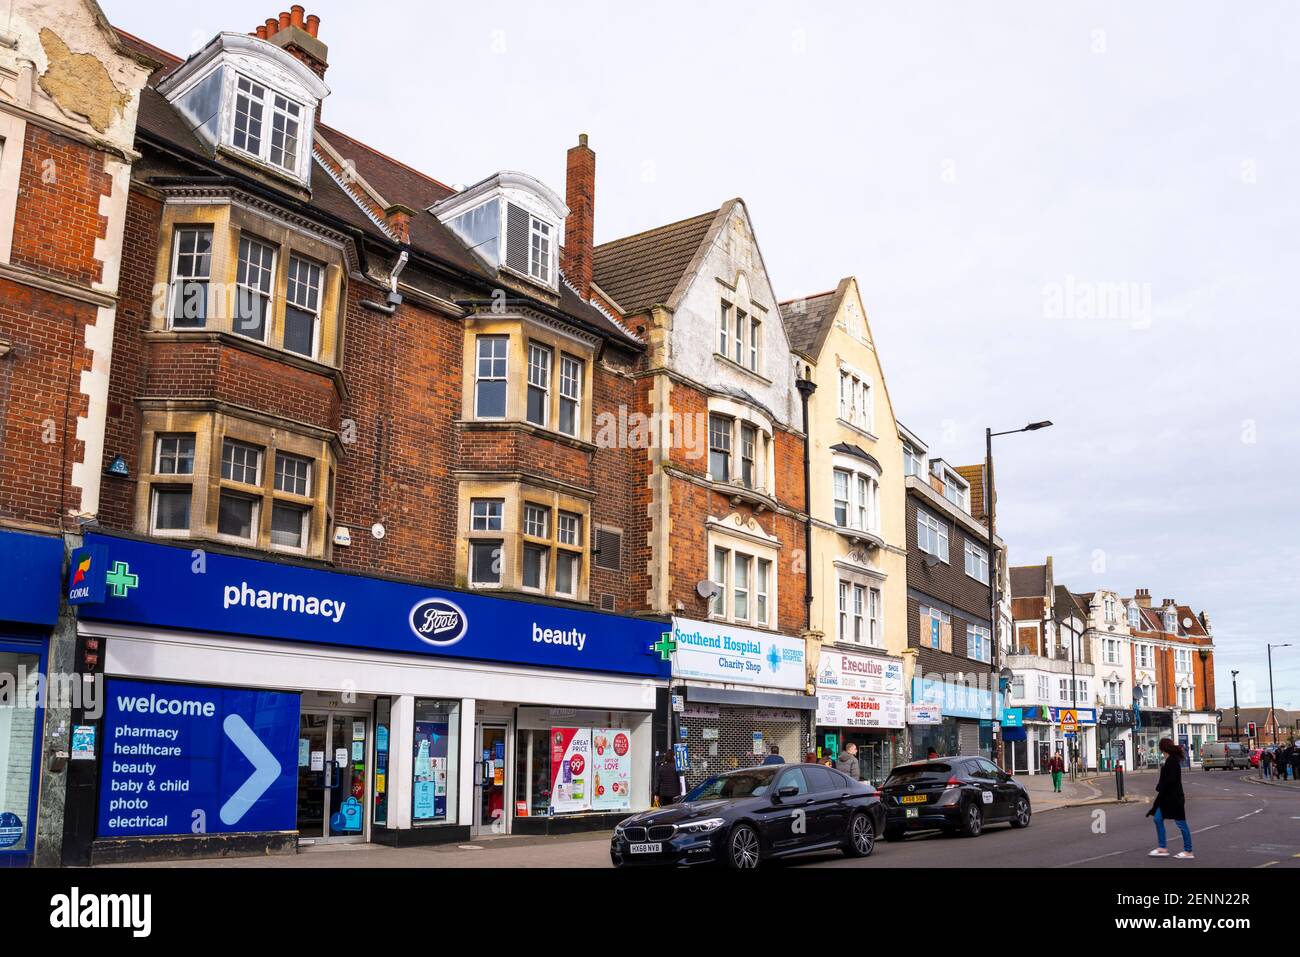 Property, architecture in Hamlet Court Road, Westcliff on Sea, Essex, UK, which is originally an Edwardian era retail high street. Boots chemist Stock Photo